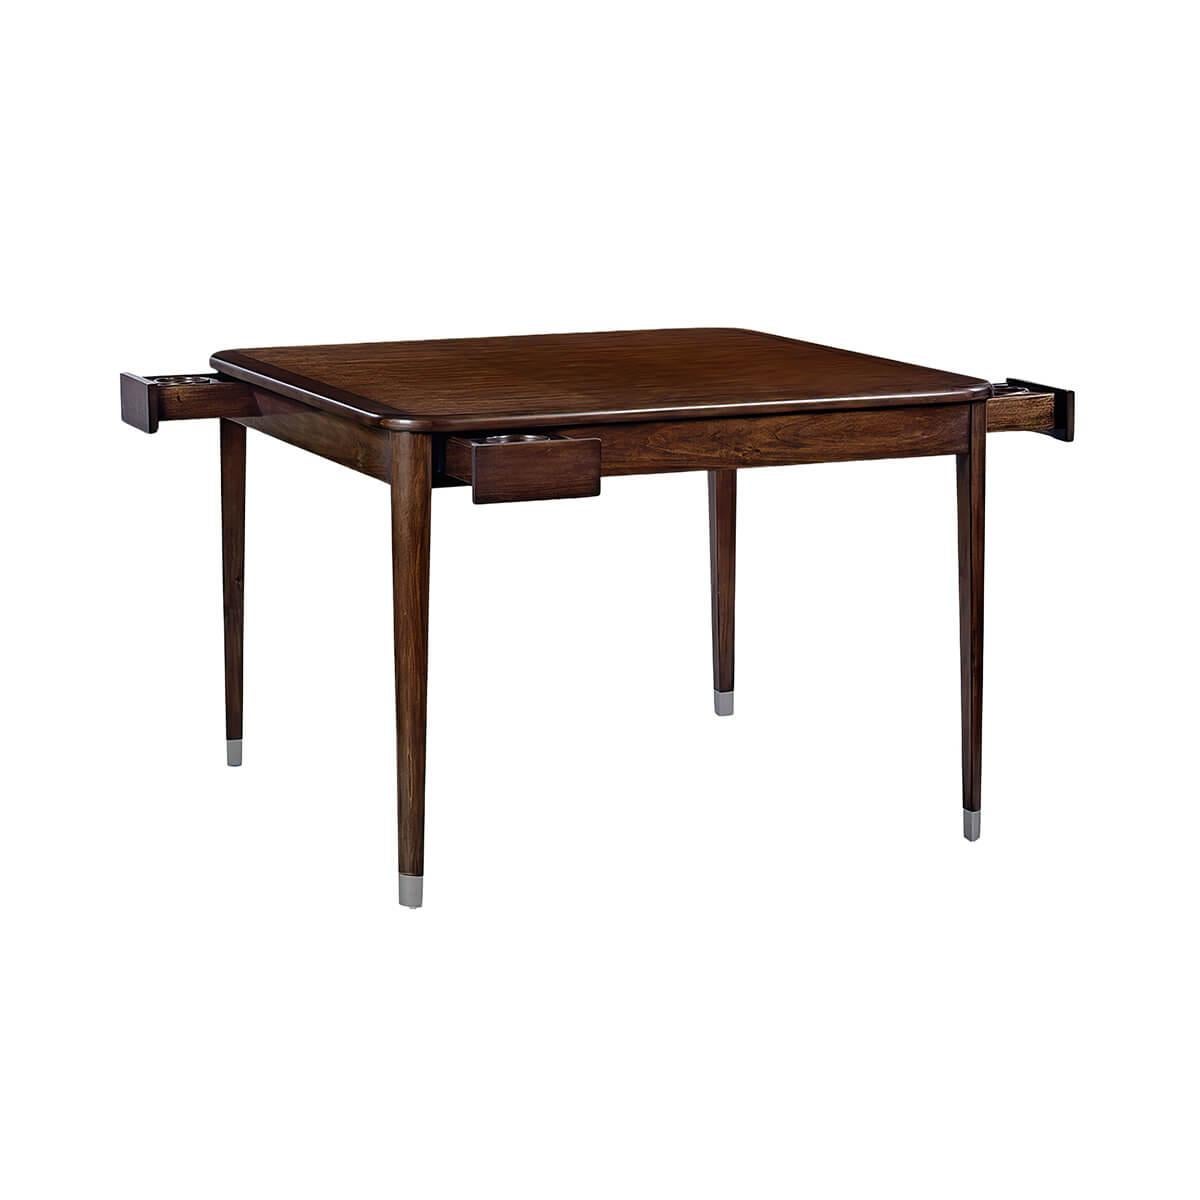 Characterized by its clean, straight lines and minimalist aesthetic, the square table has a warm hand-rubbed walnut stain finish. The design features a square top with rounded edges and corners, and tapered legs with brass caps, contributing to a